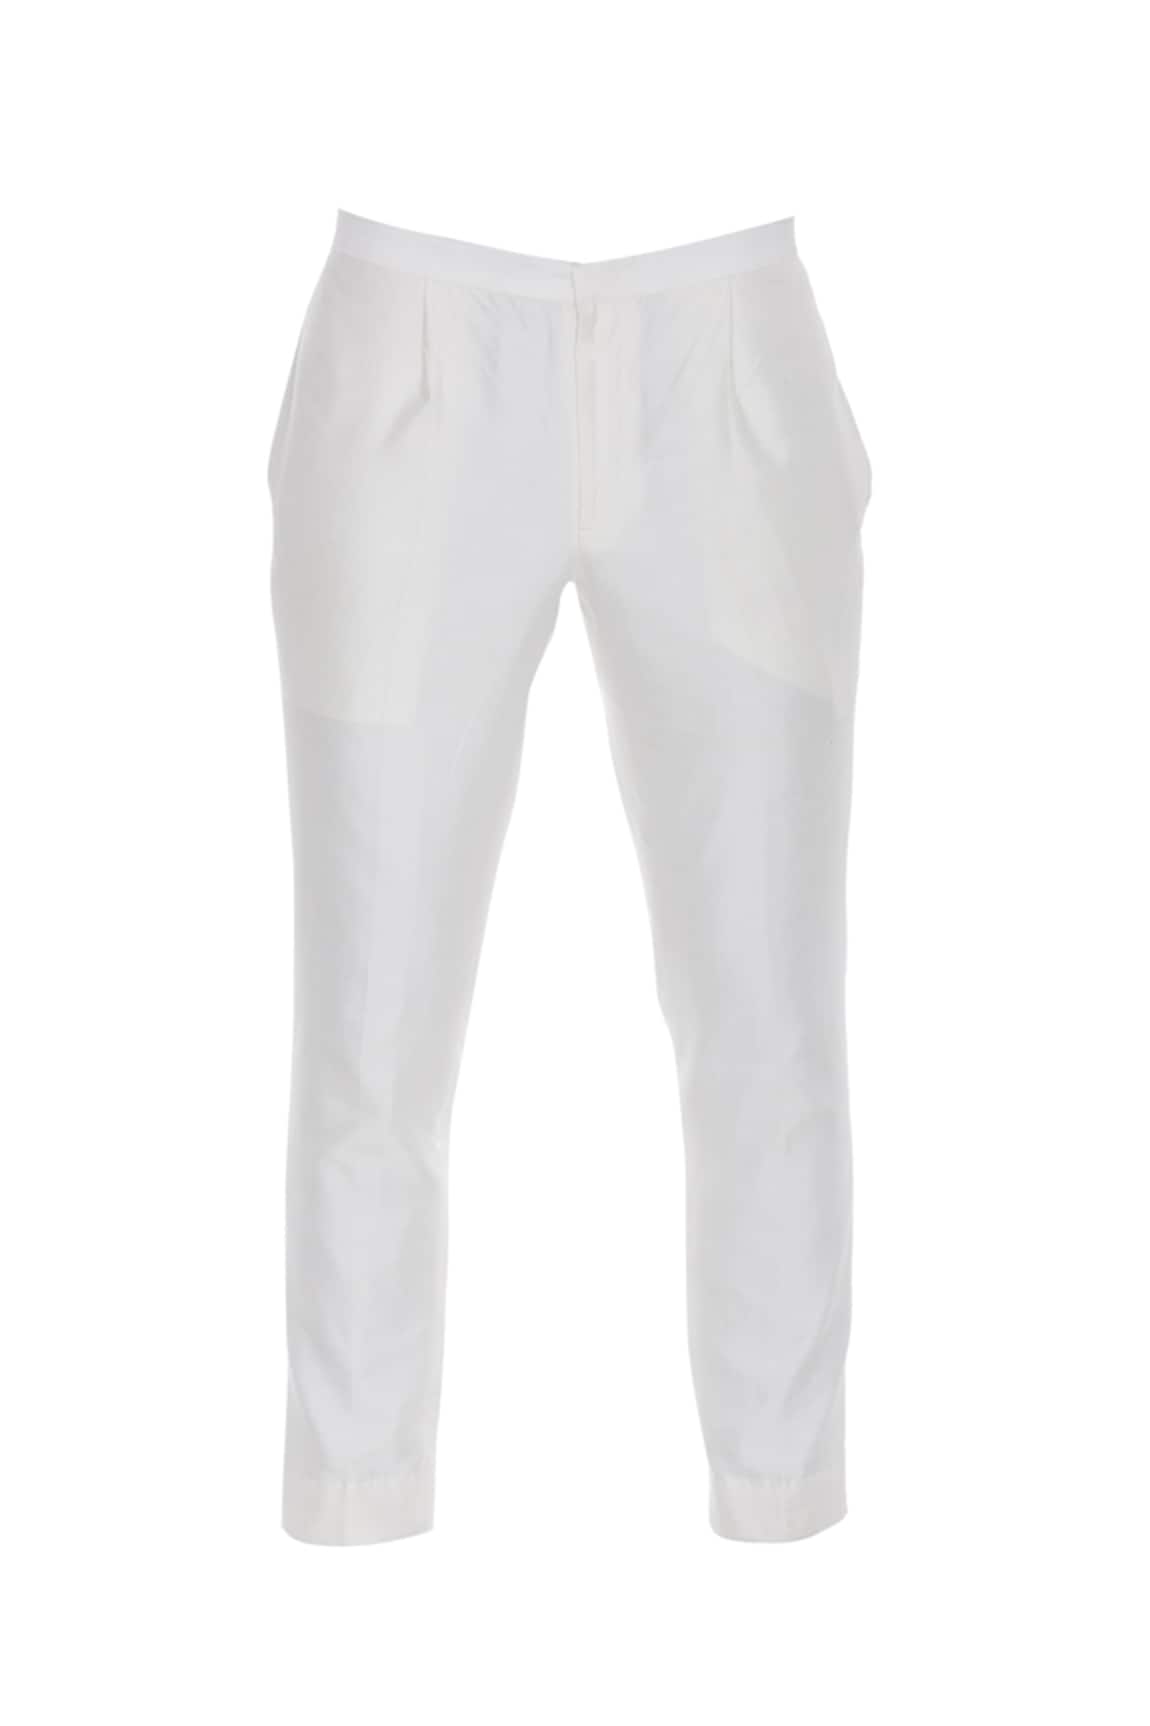 White Comfortable And Washable Regular Fit Women Beige Cotton Silk Trousers  at Best Price in Nagpur  Arya Garments